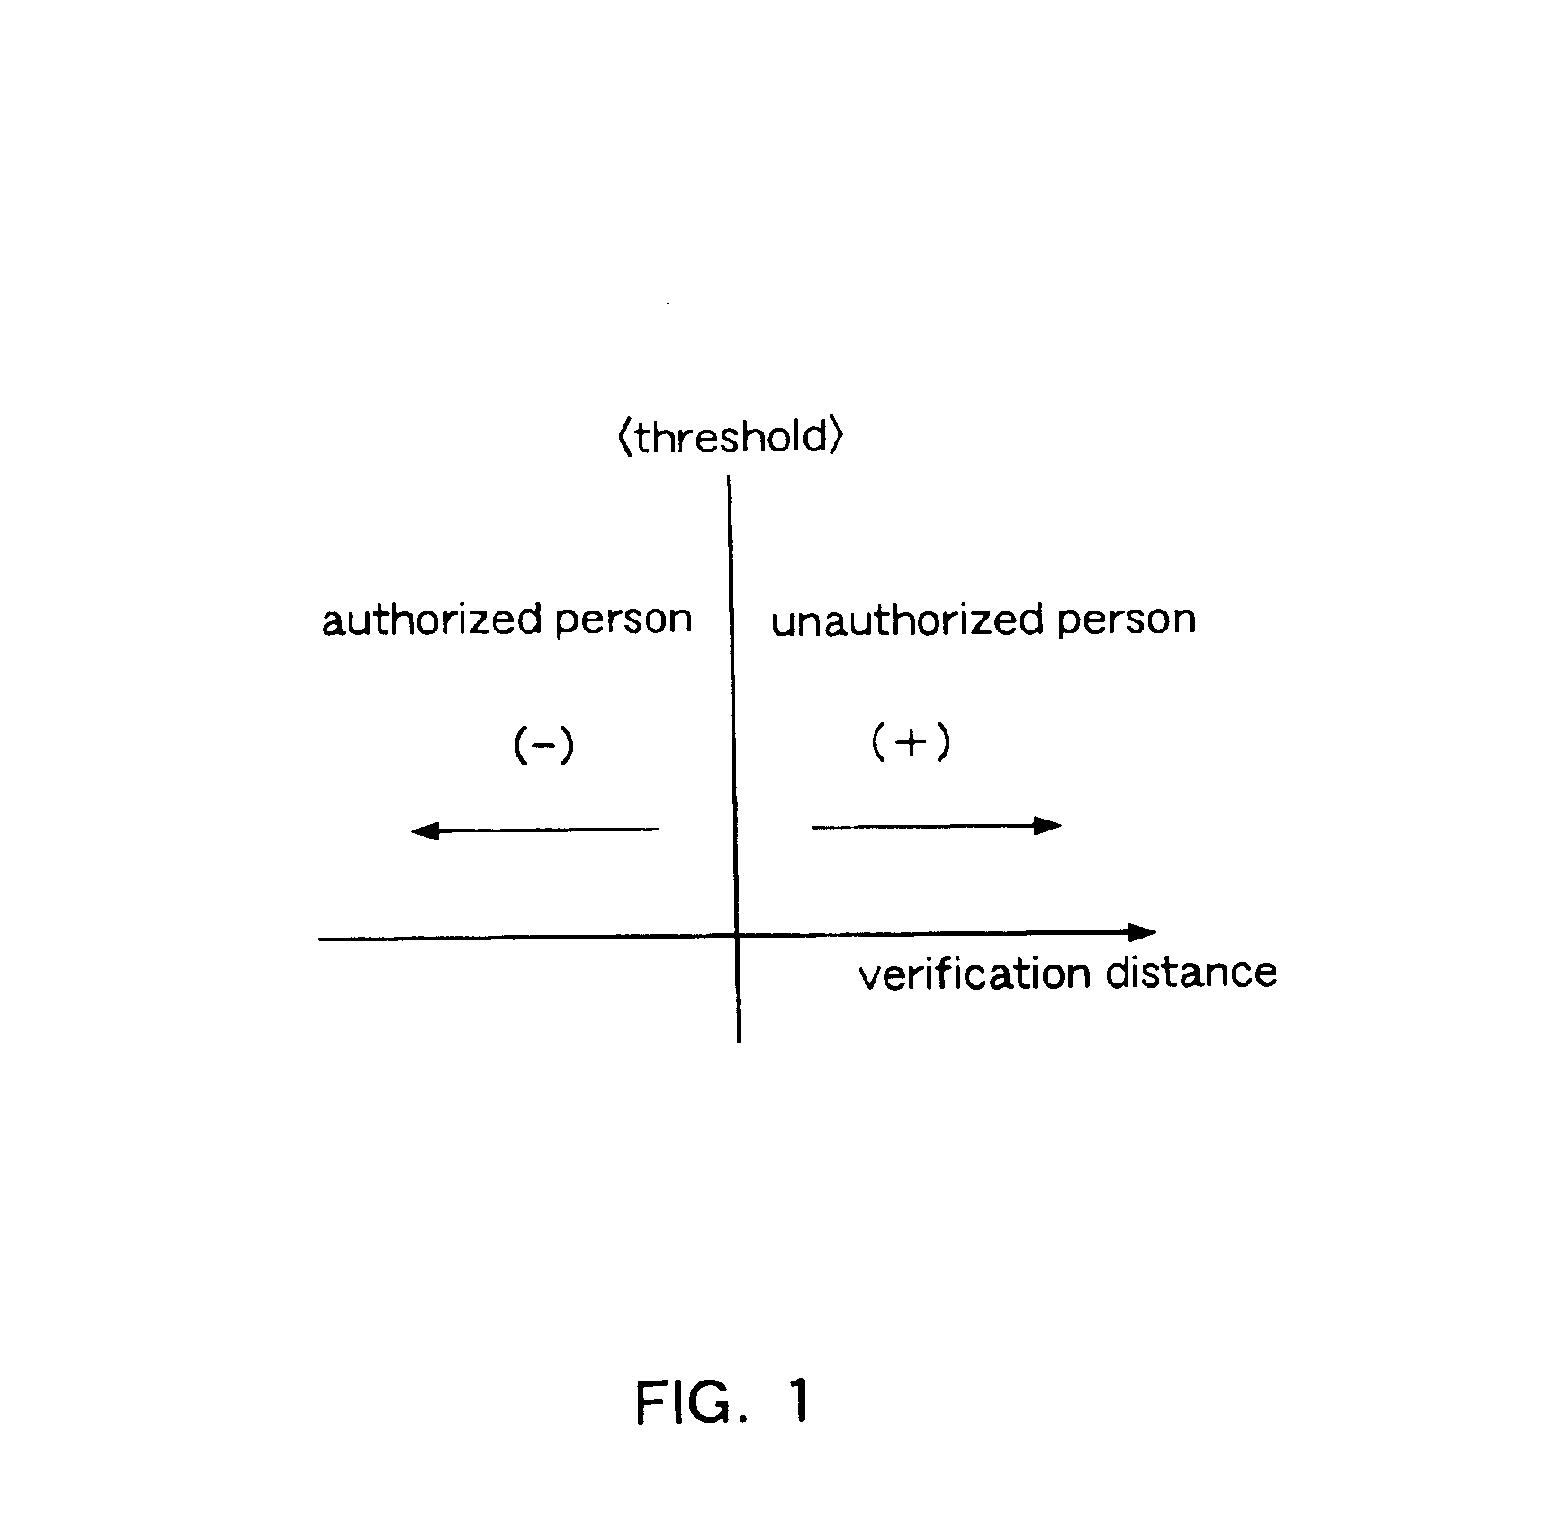 Speaker verification apparatus and method utilizing voice information of a registered speaker with extracted feature parameter and calculated verification distance to determine a match of an input voice with that of a registered speaker